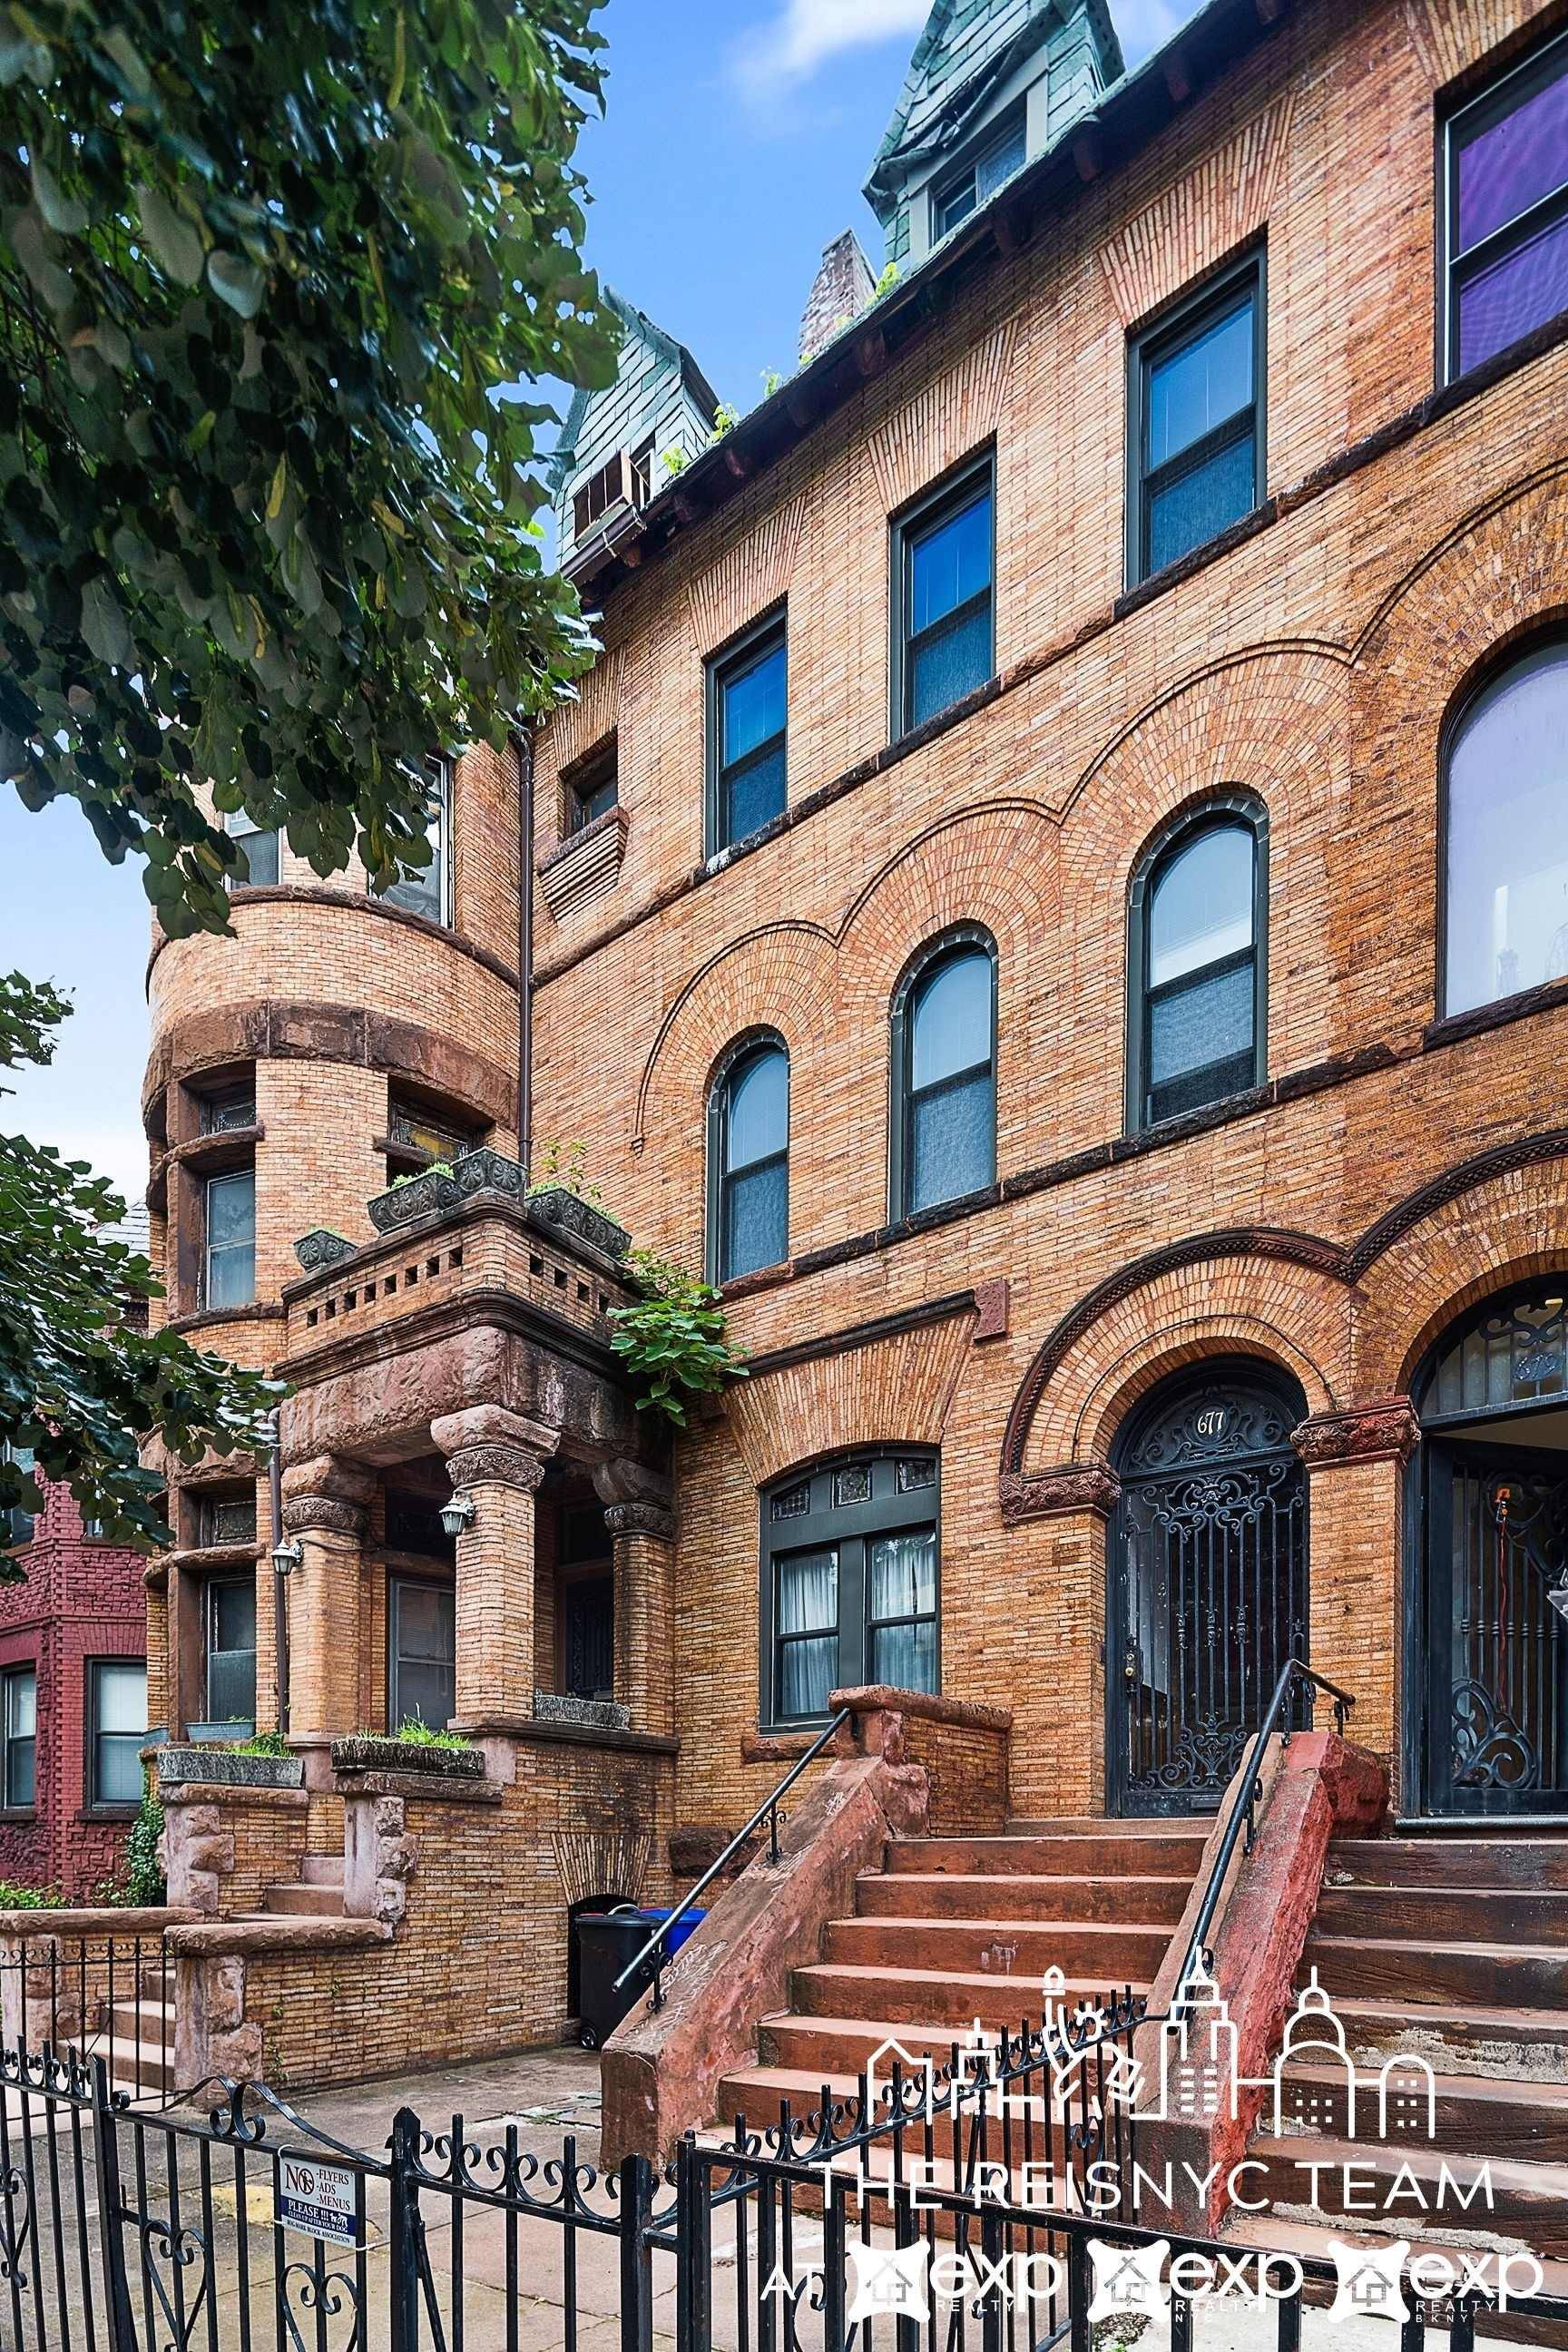 Don't pass up this chance to create your dream home in desirable Crown Heights.